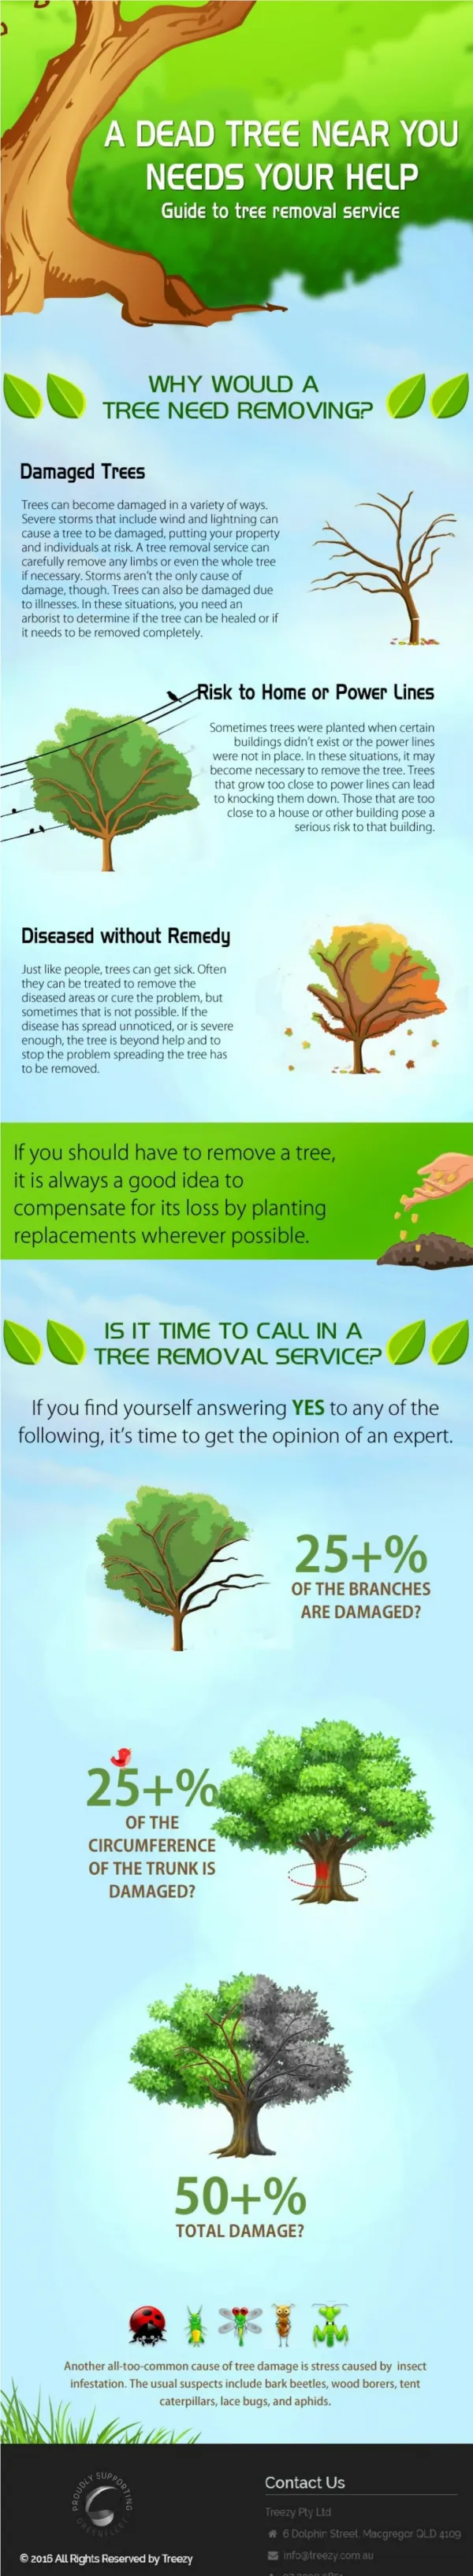 Guide to Tree Removal Services